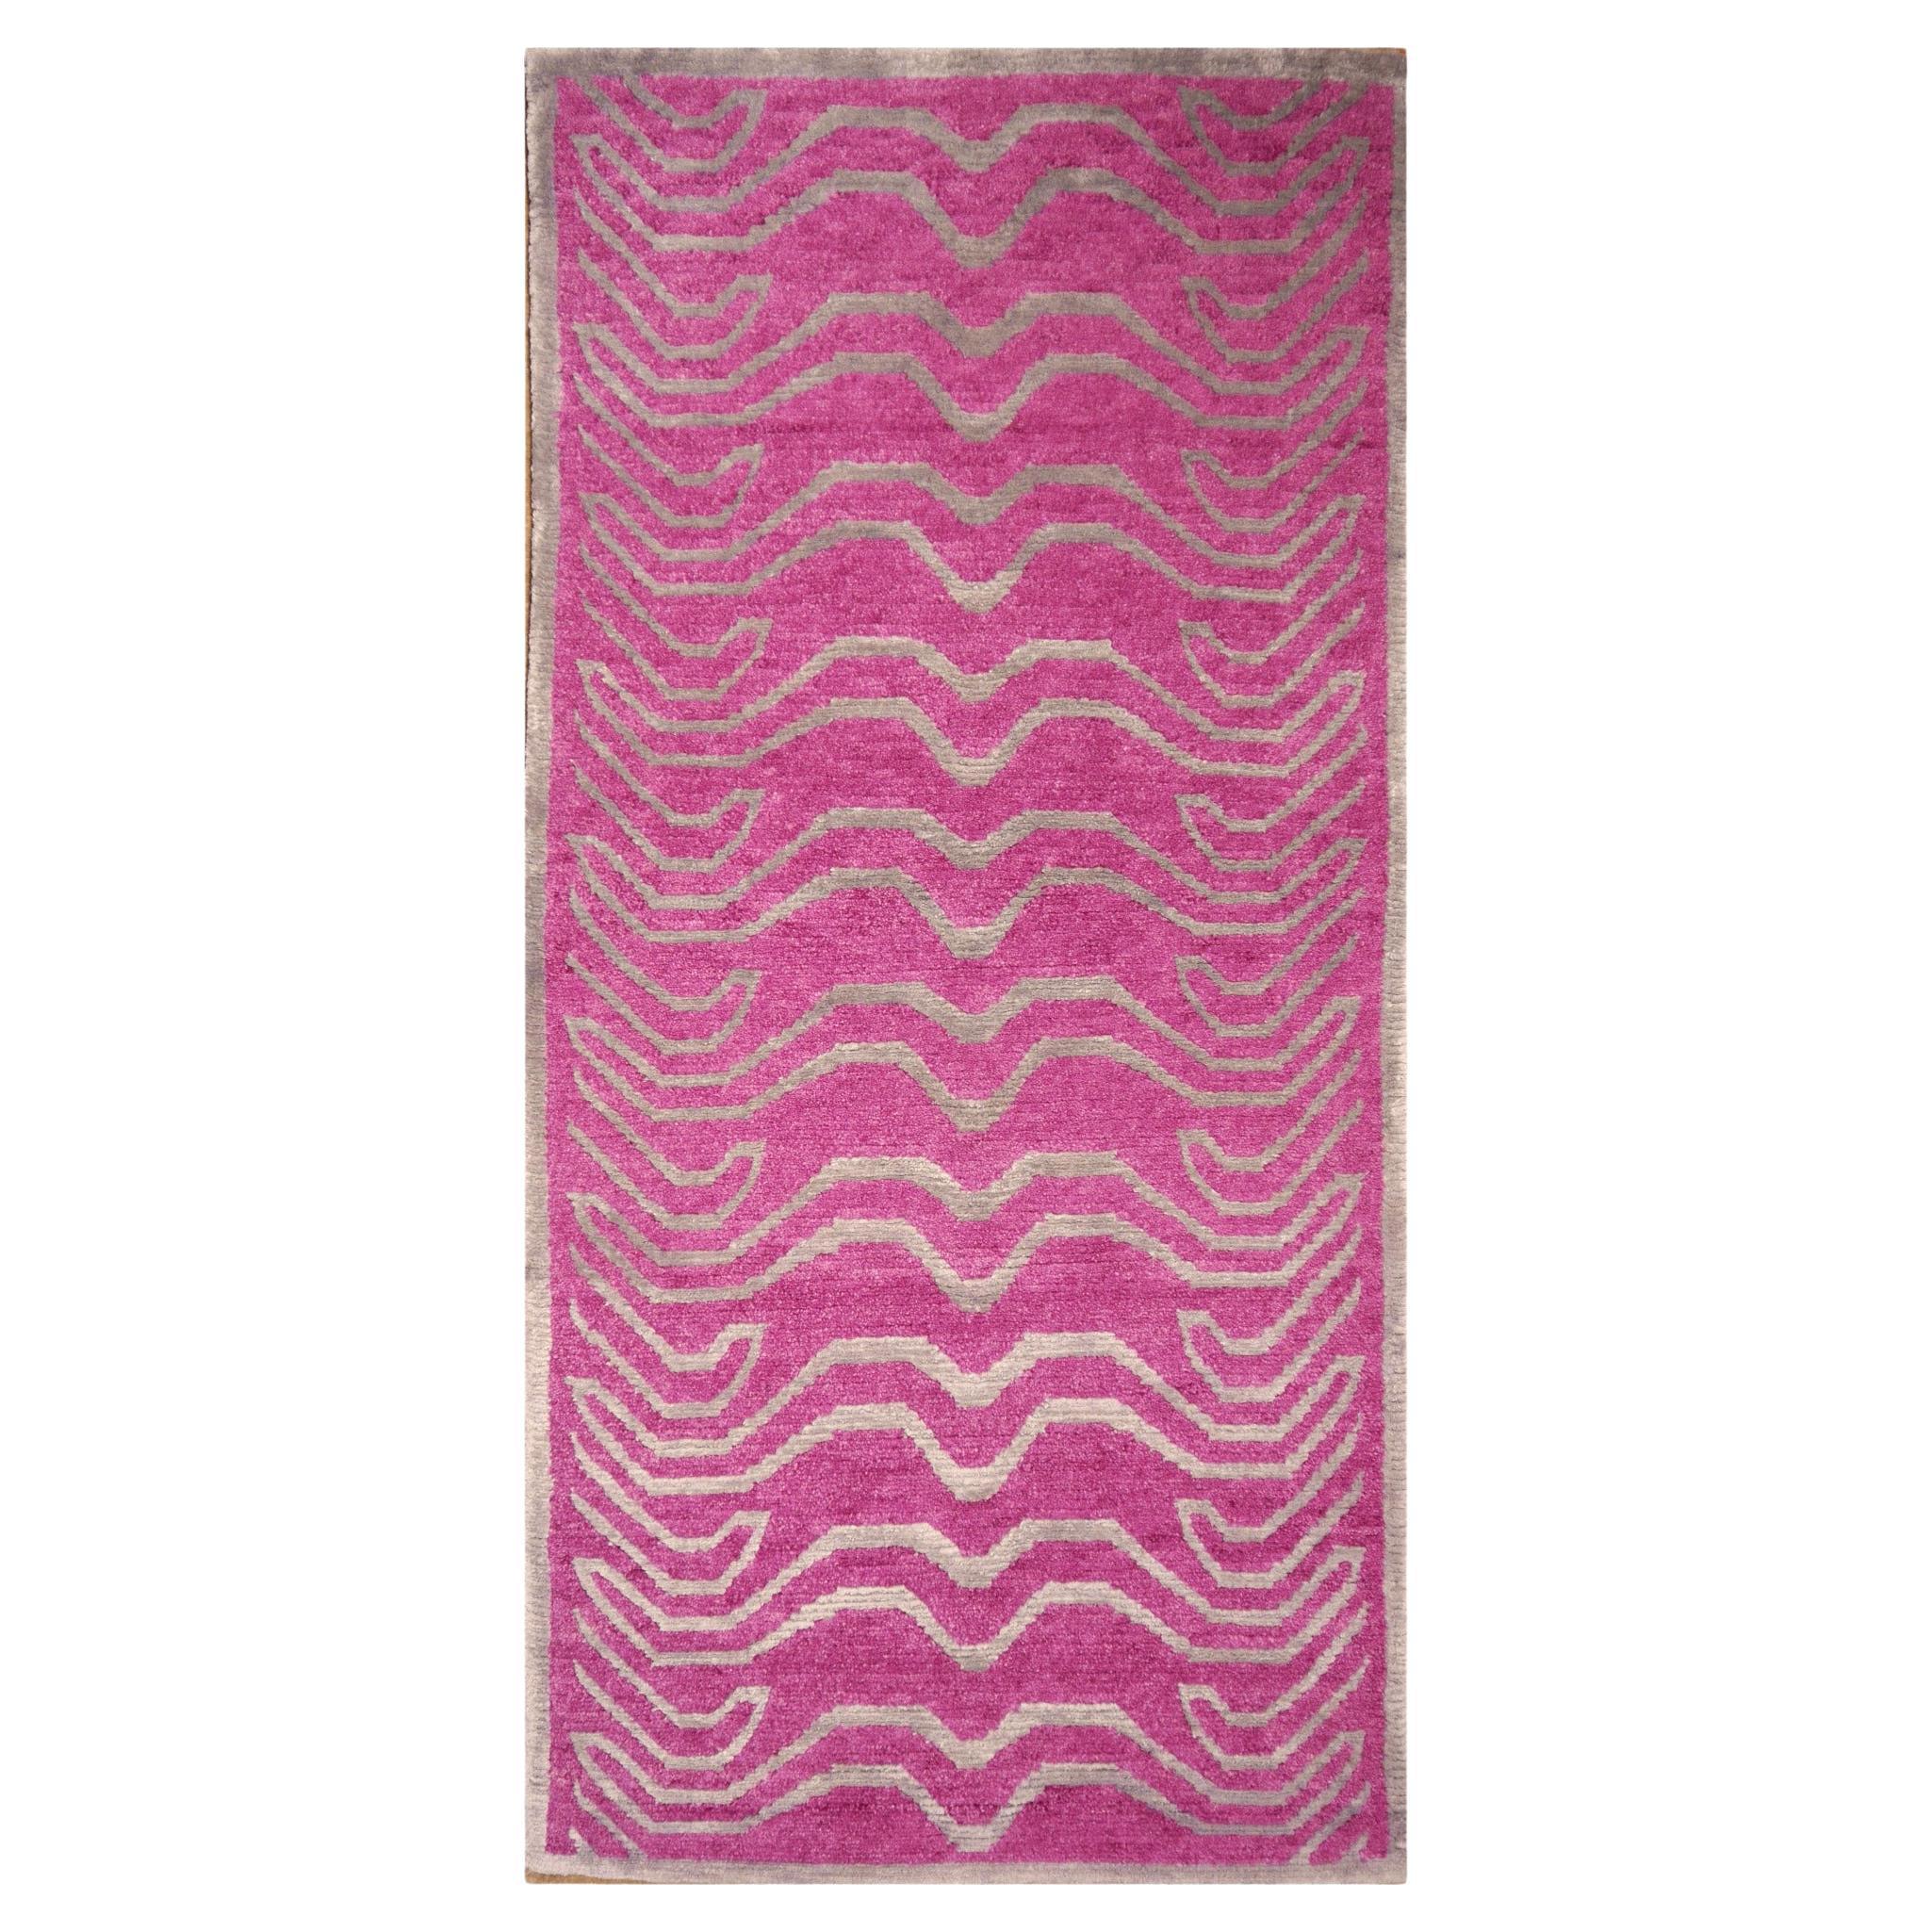 Tibetan Tiger Rug Wool Silk Hand Knotted Pink Silver by Djoharian Collection